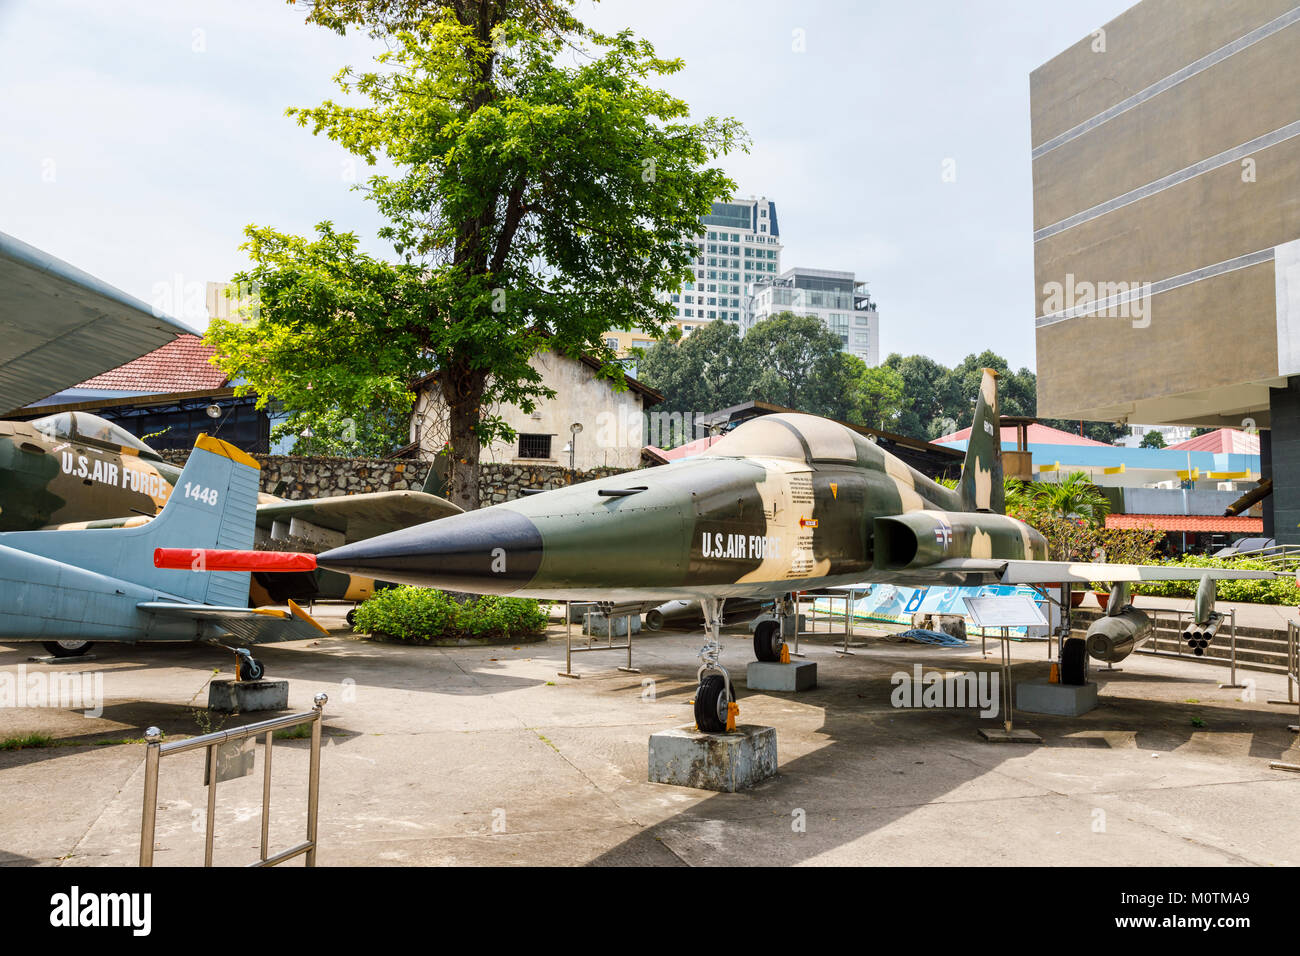 USAF Northrop F-5A Jet Fighter, a military exhibit on display at the War Remnants Museum of the Vietnam War, Saigon (Ho Chi Minh City), south Vietnam Stock Photo